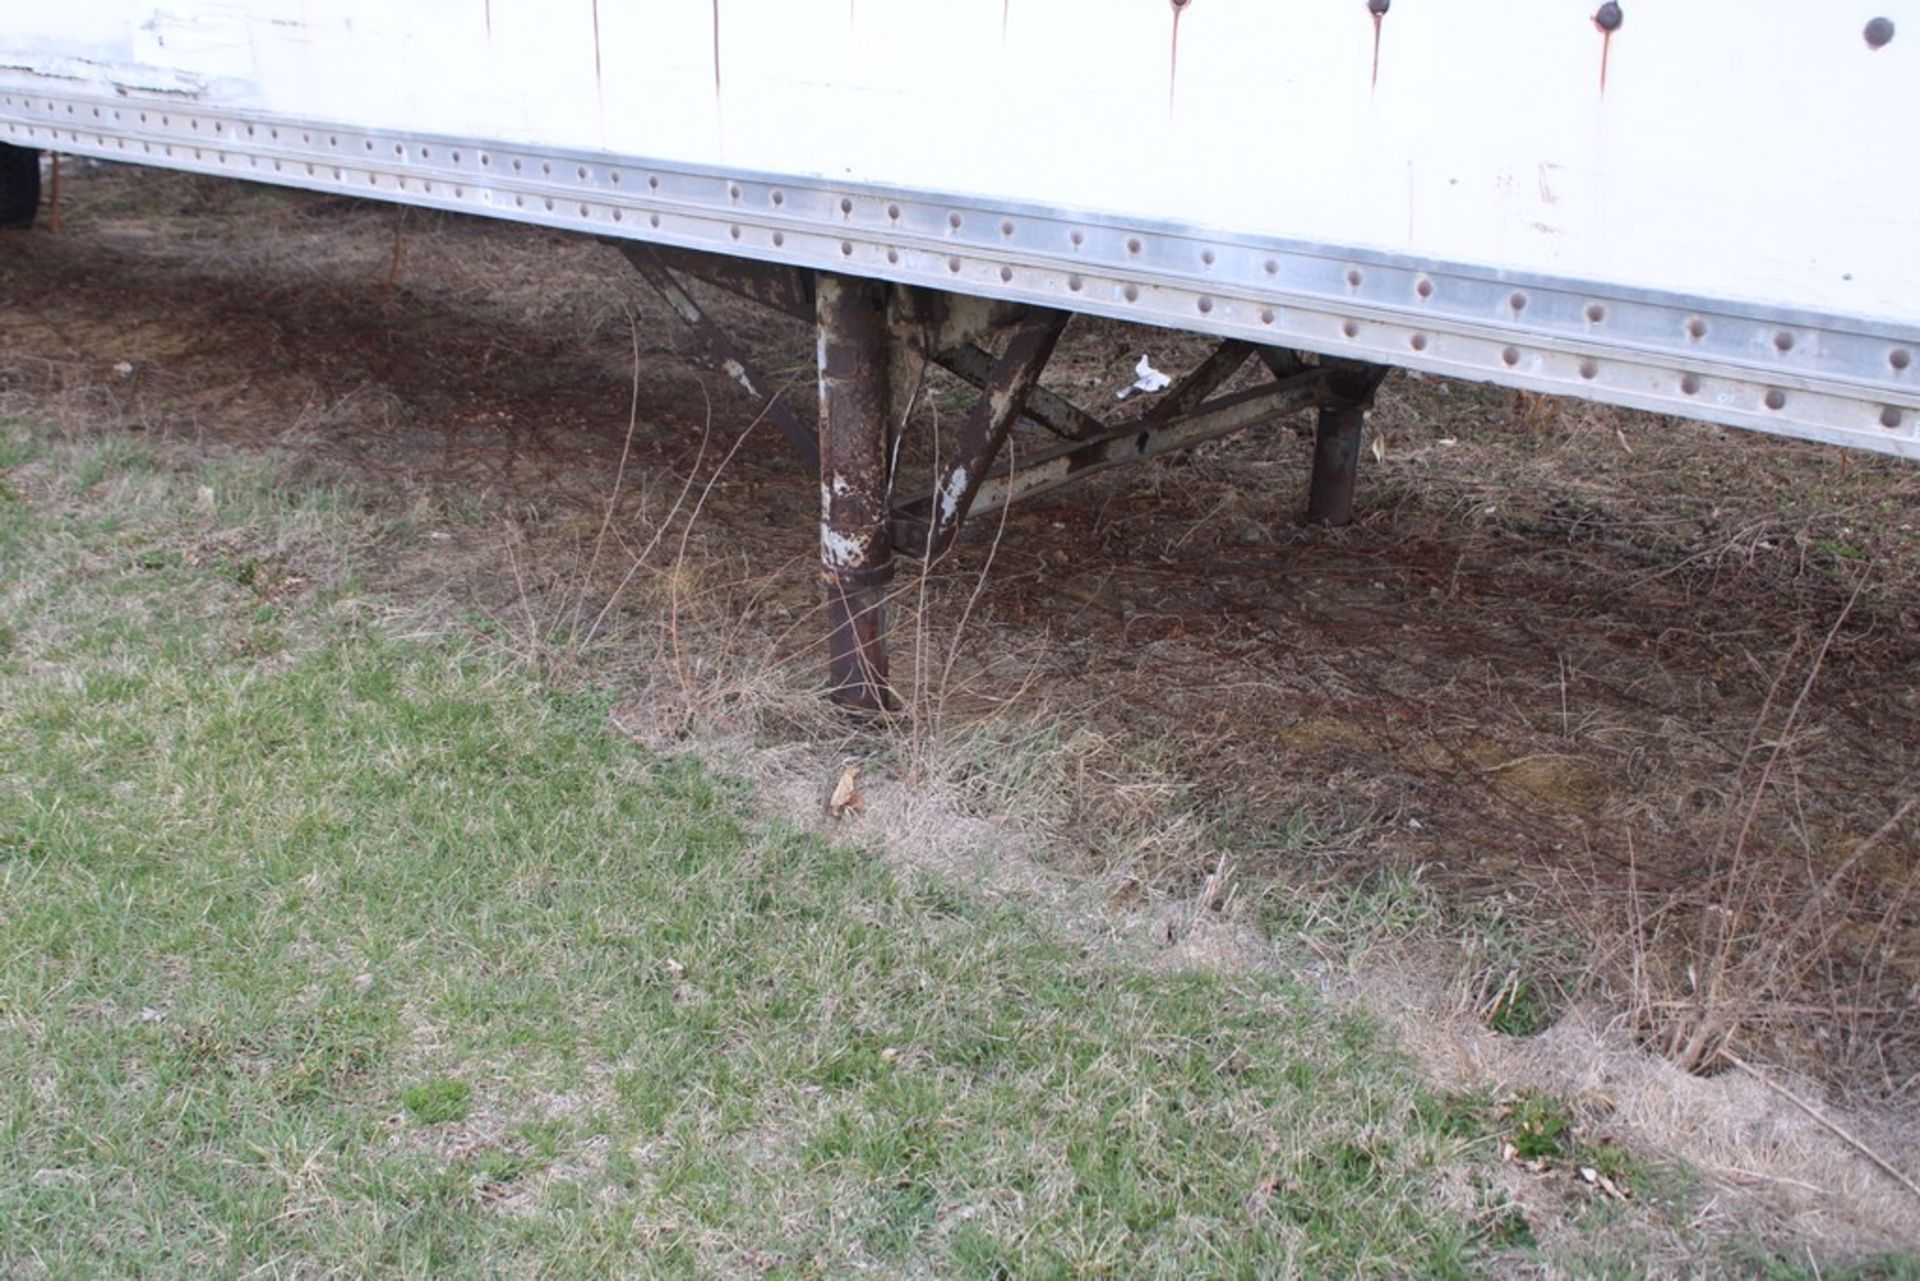 APPROX. 45’ UNIDENTIFIED ENCLOSED DRY VAN TRAILER - Image 3 of 4